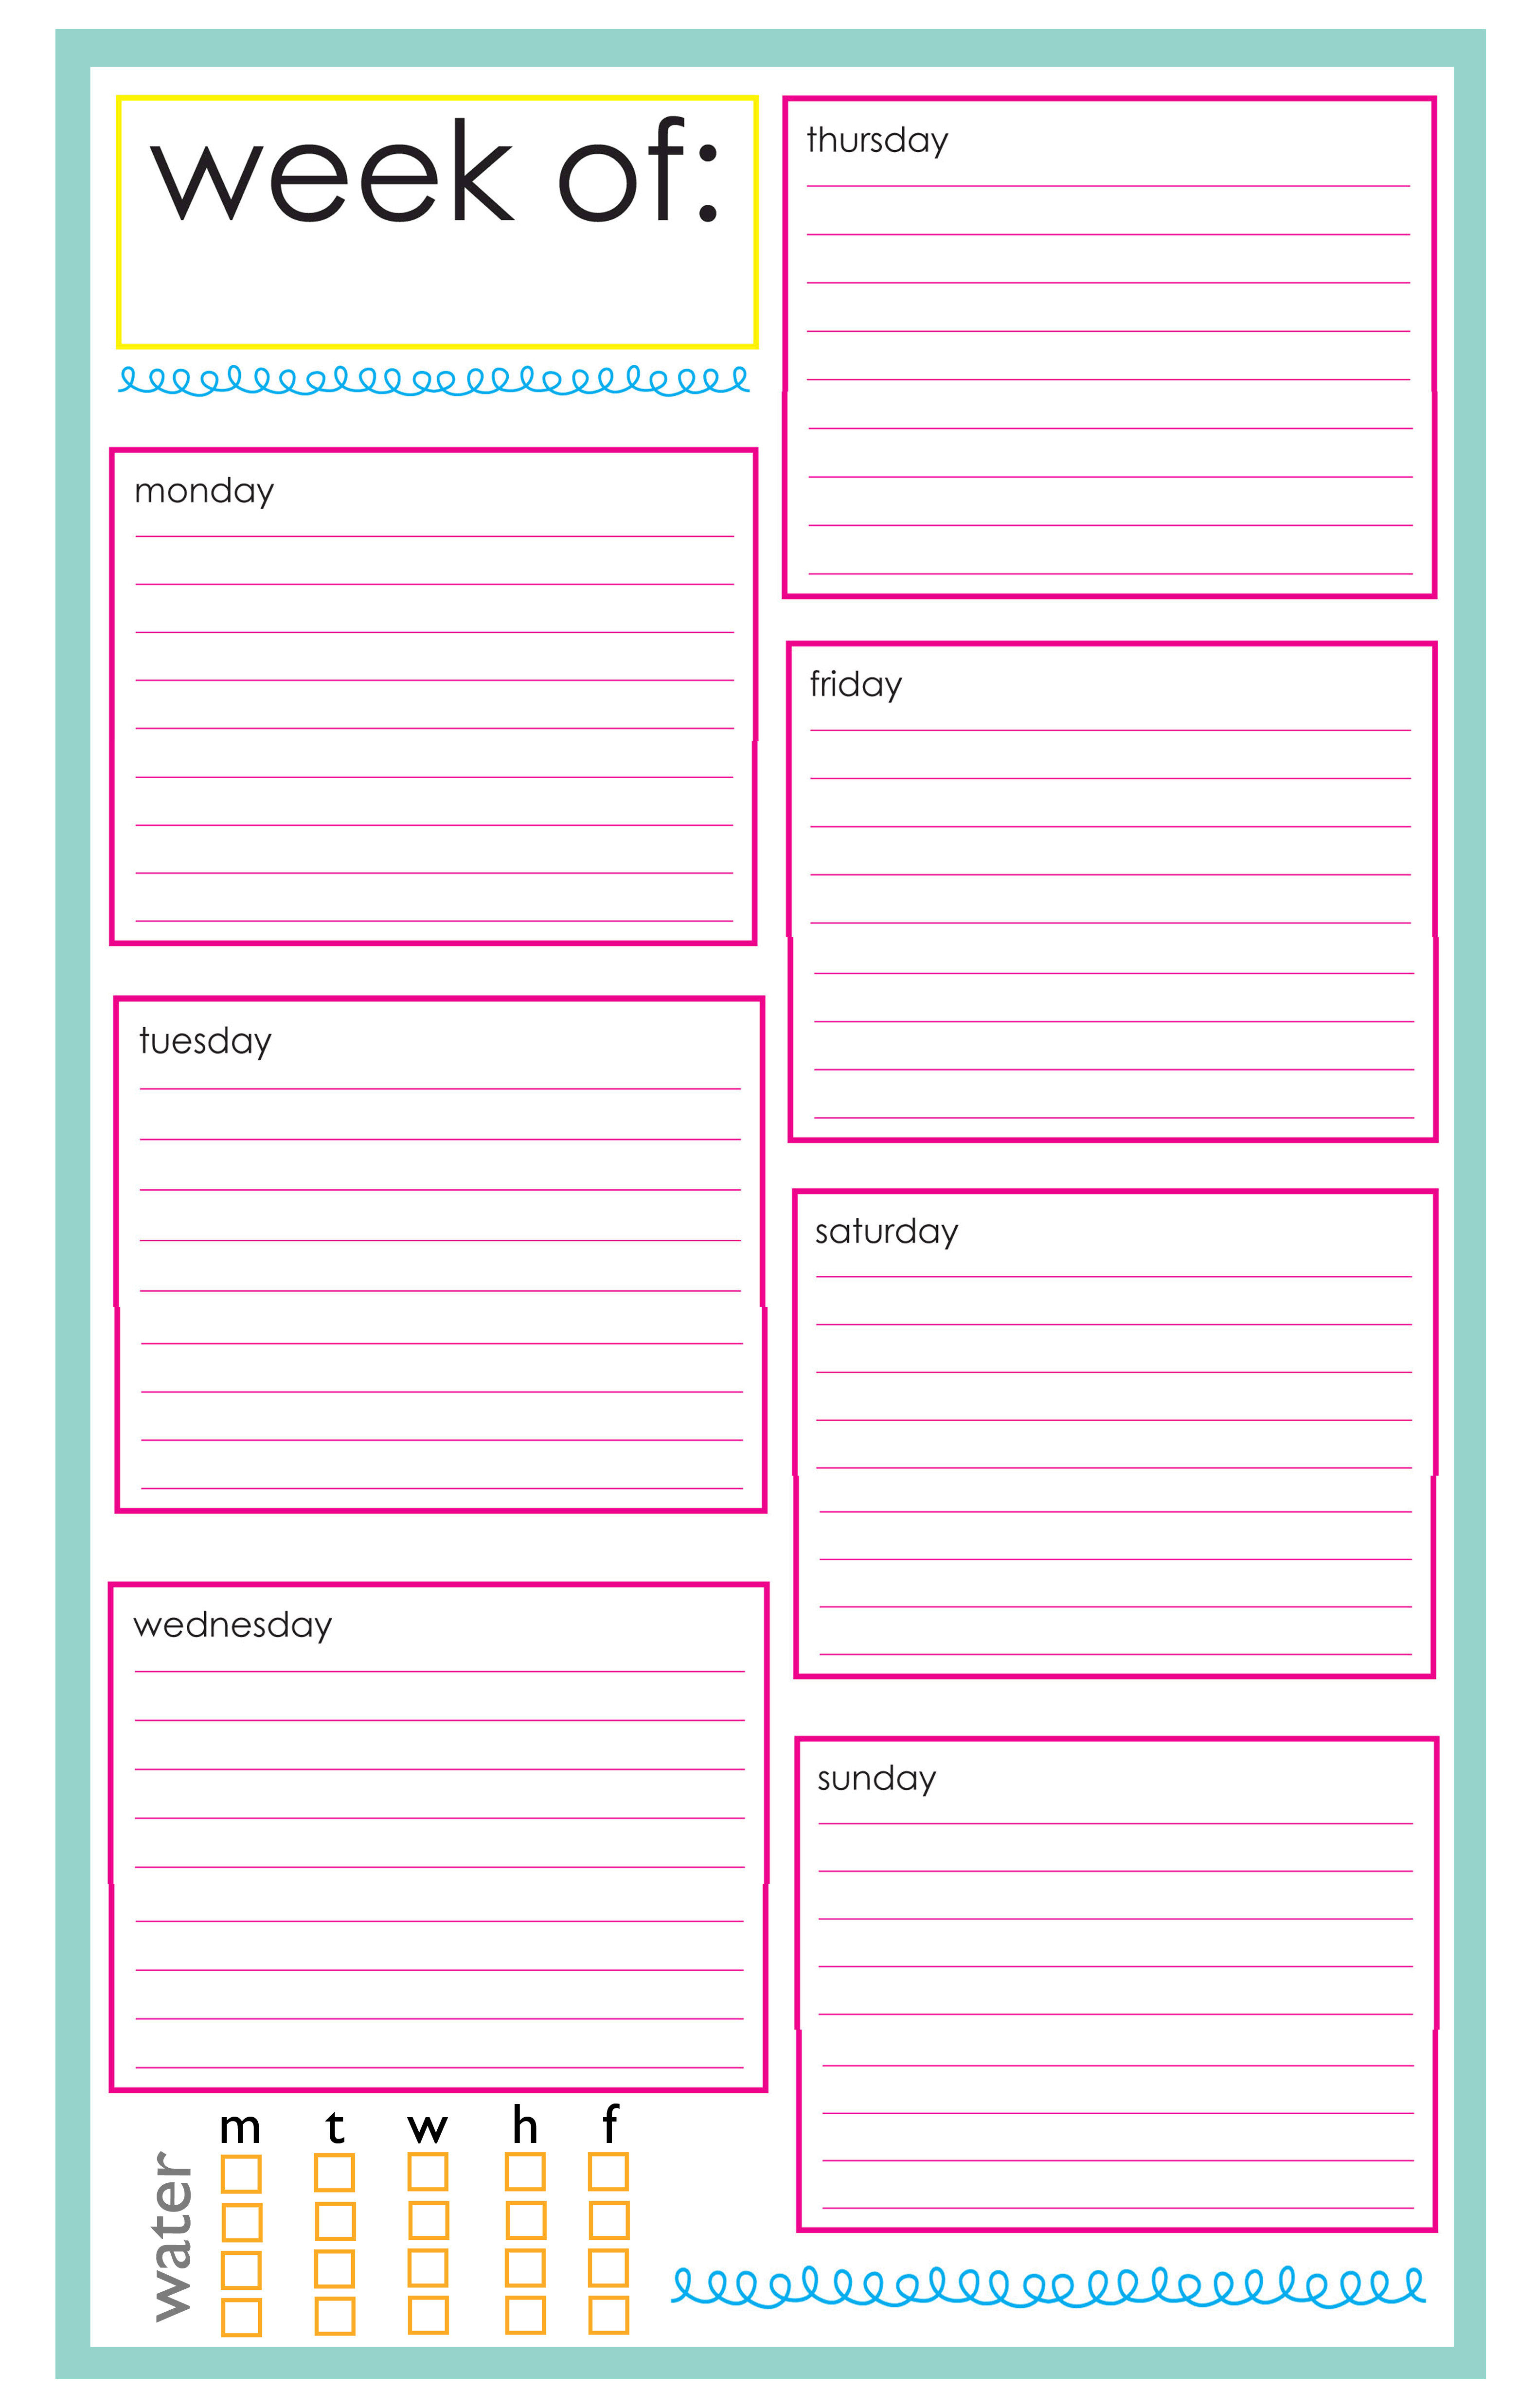 6-best-images-of-weekly-planner-printable-page-2-2-page-weekly-planner-printable-weekly